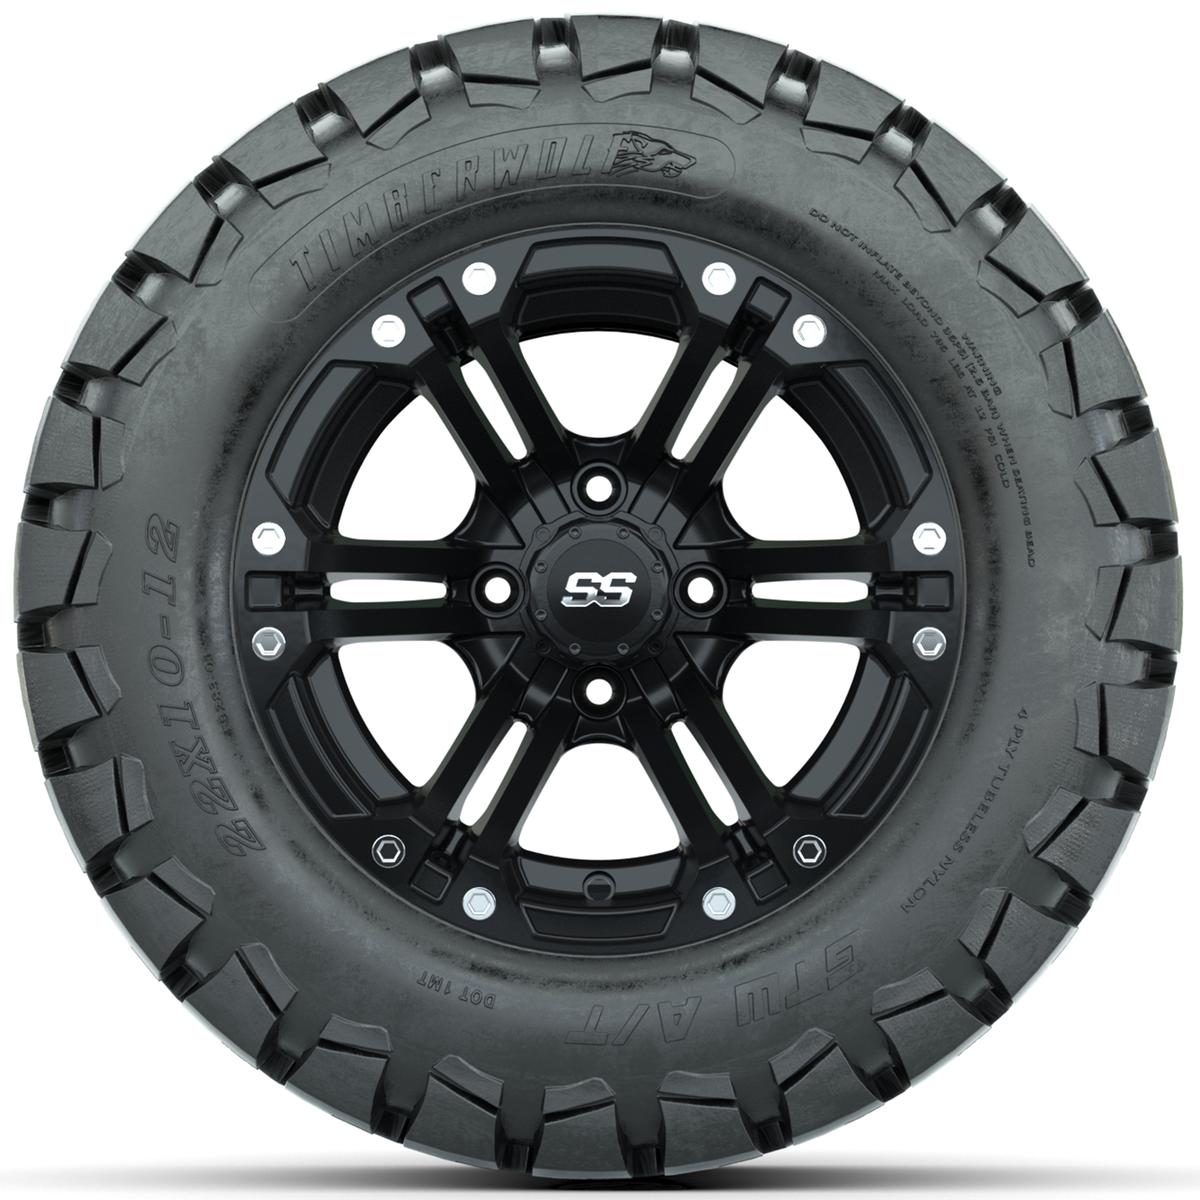 Set of (4) 12 in GTW Specter Wheels with 22x10-12 GTW Timberwolf All-Terrain Tires